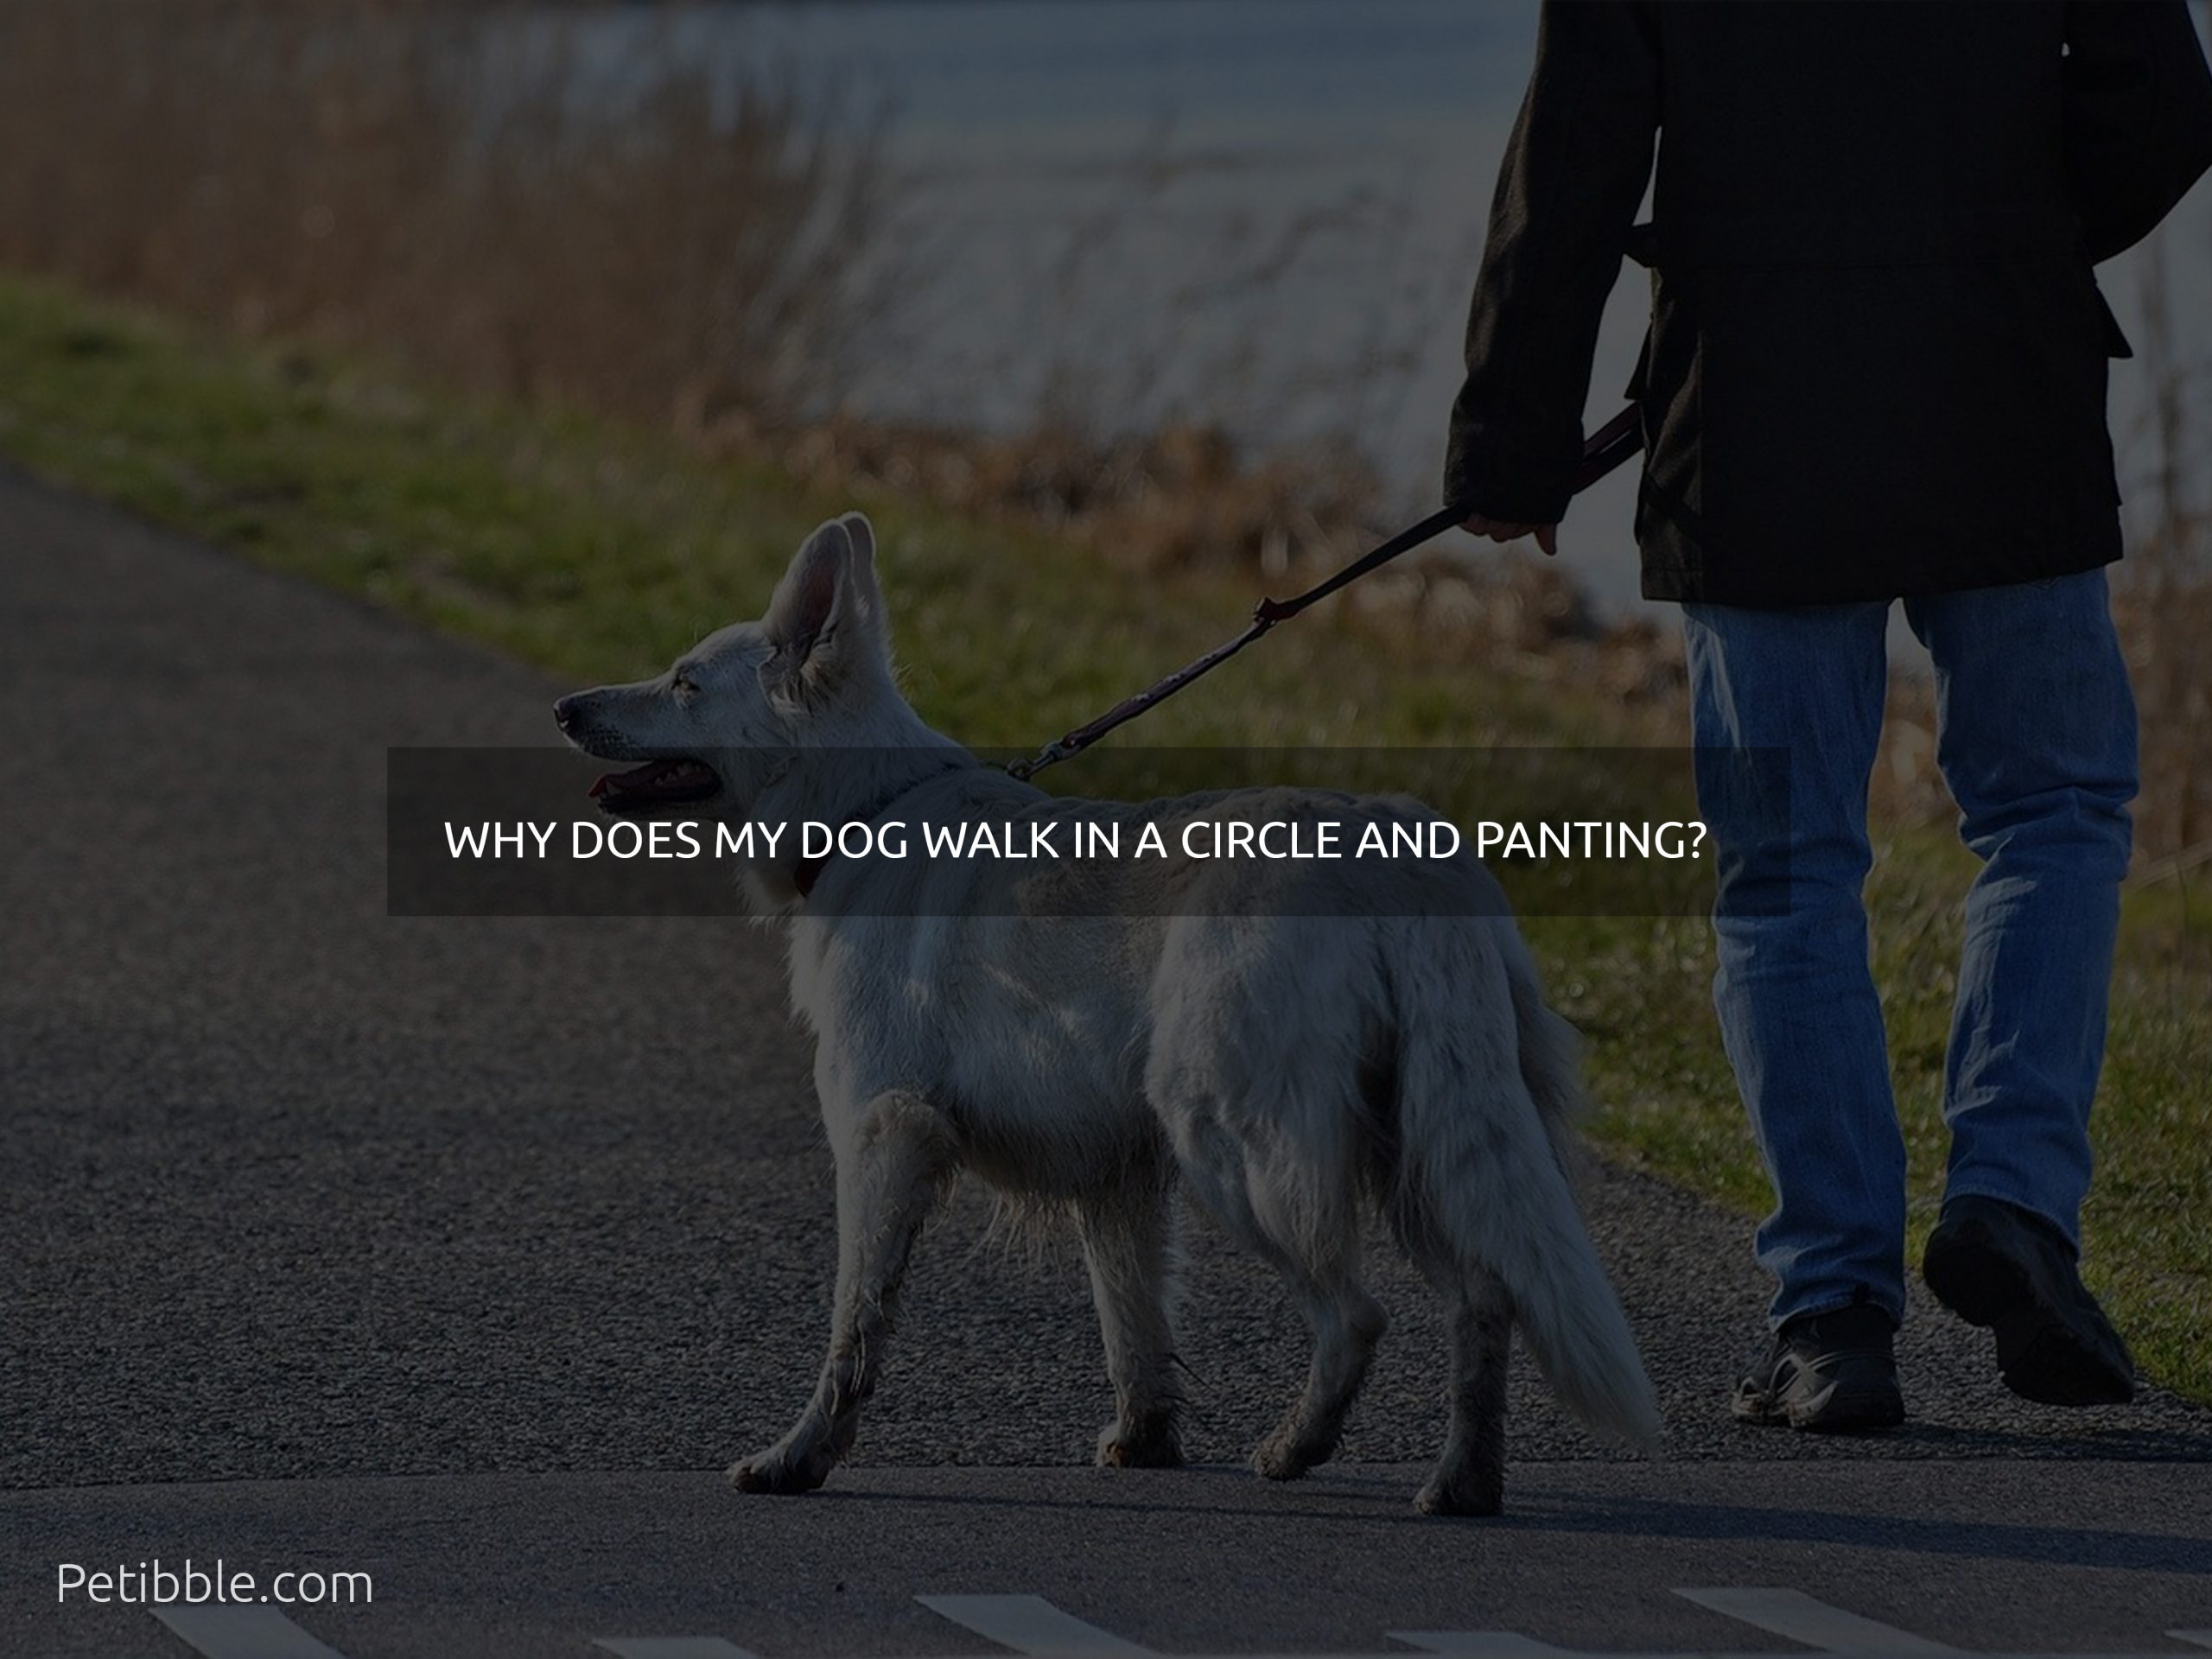  Why Does My dog walk in a circle And panting?